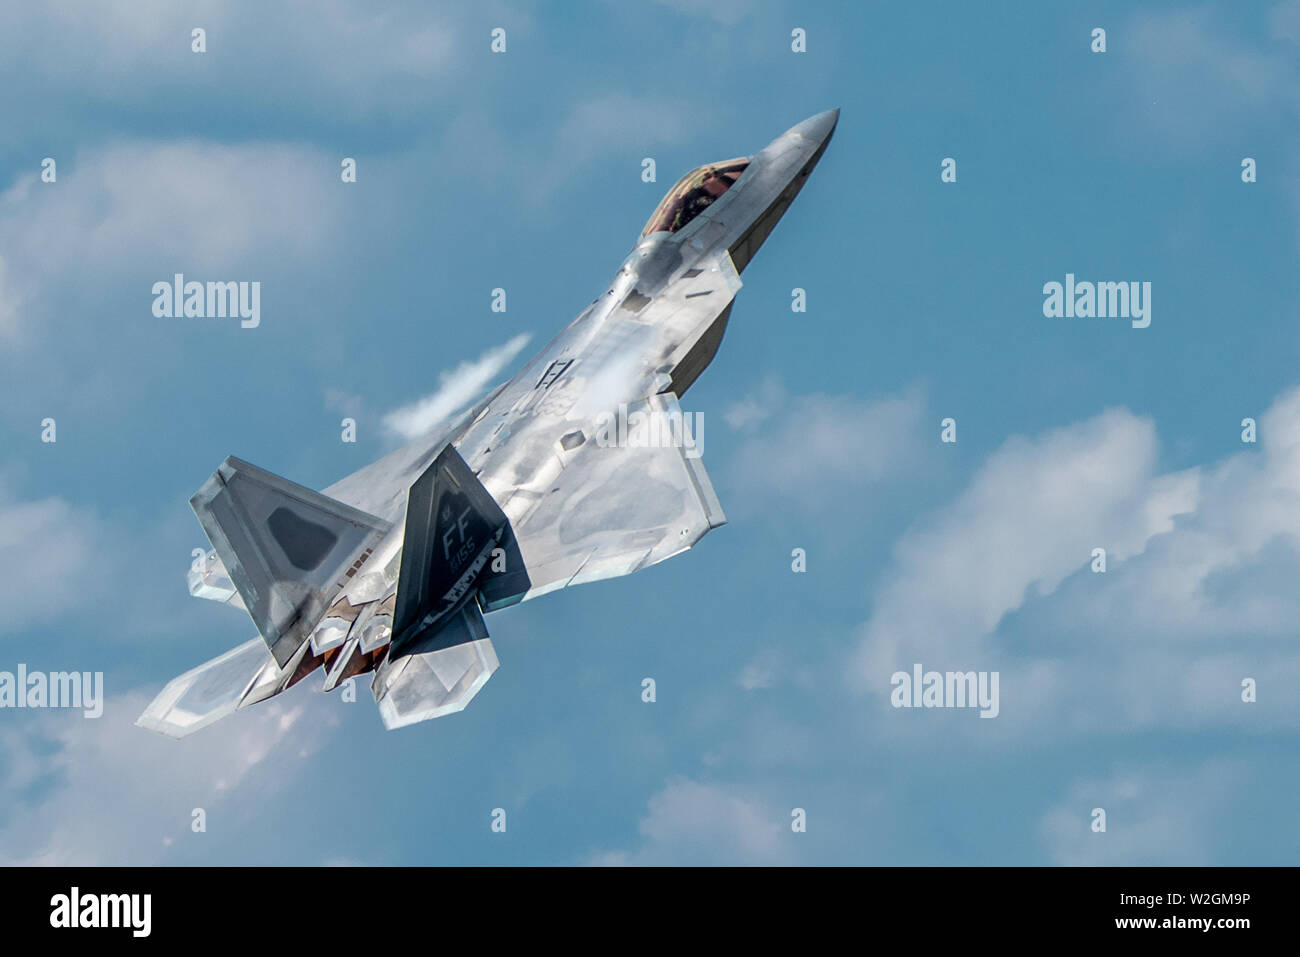 U.S. Air Force Maj. Paul Lopez, F-22 Demo Team commander, pulls into the vertical during the Battle Creek Field of Flight air show July 7, 2019. Representing the U.S. Air Force and Air Combat Command, the F-22 Demo Team travels to 25 air shows a season to showcase the performance and capabilities of the world's premier 5th-generation fighter. (U.S. Air Force photo by 2nd Lt. Samuel Eckholm) Stock Photo